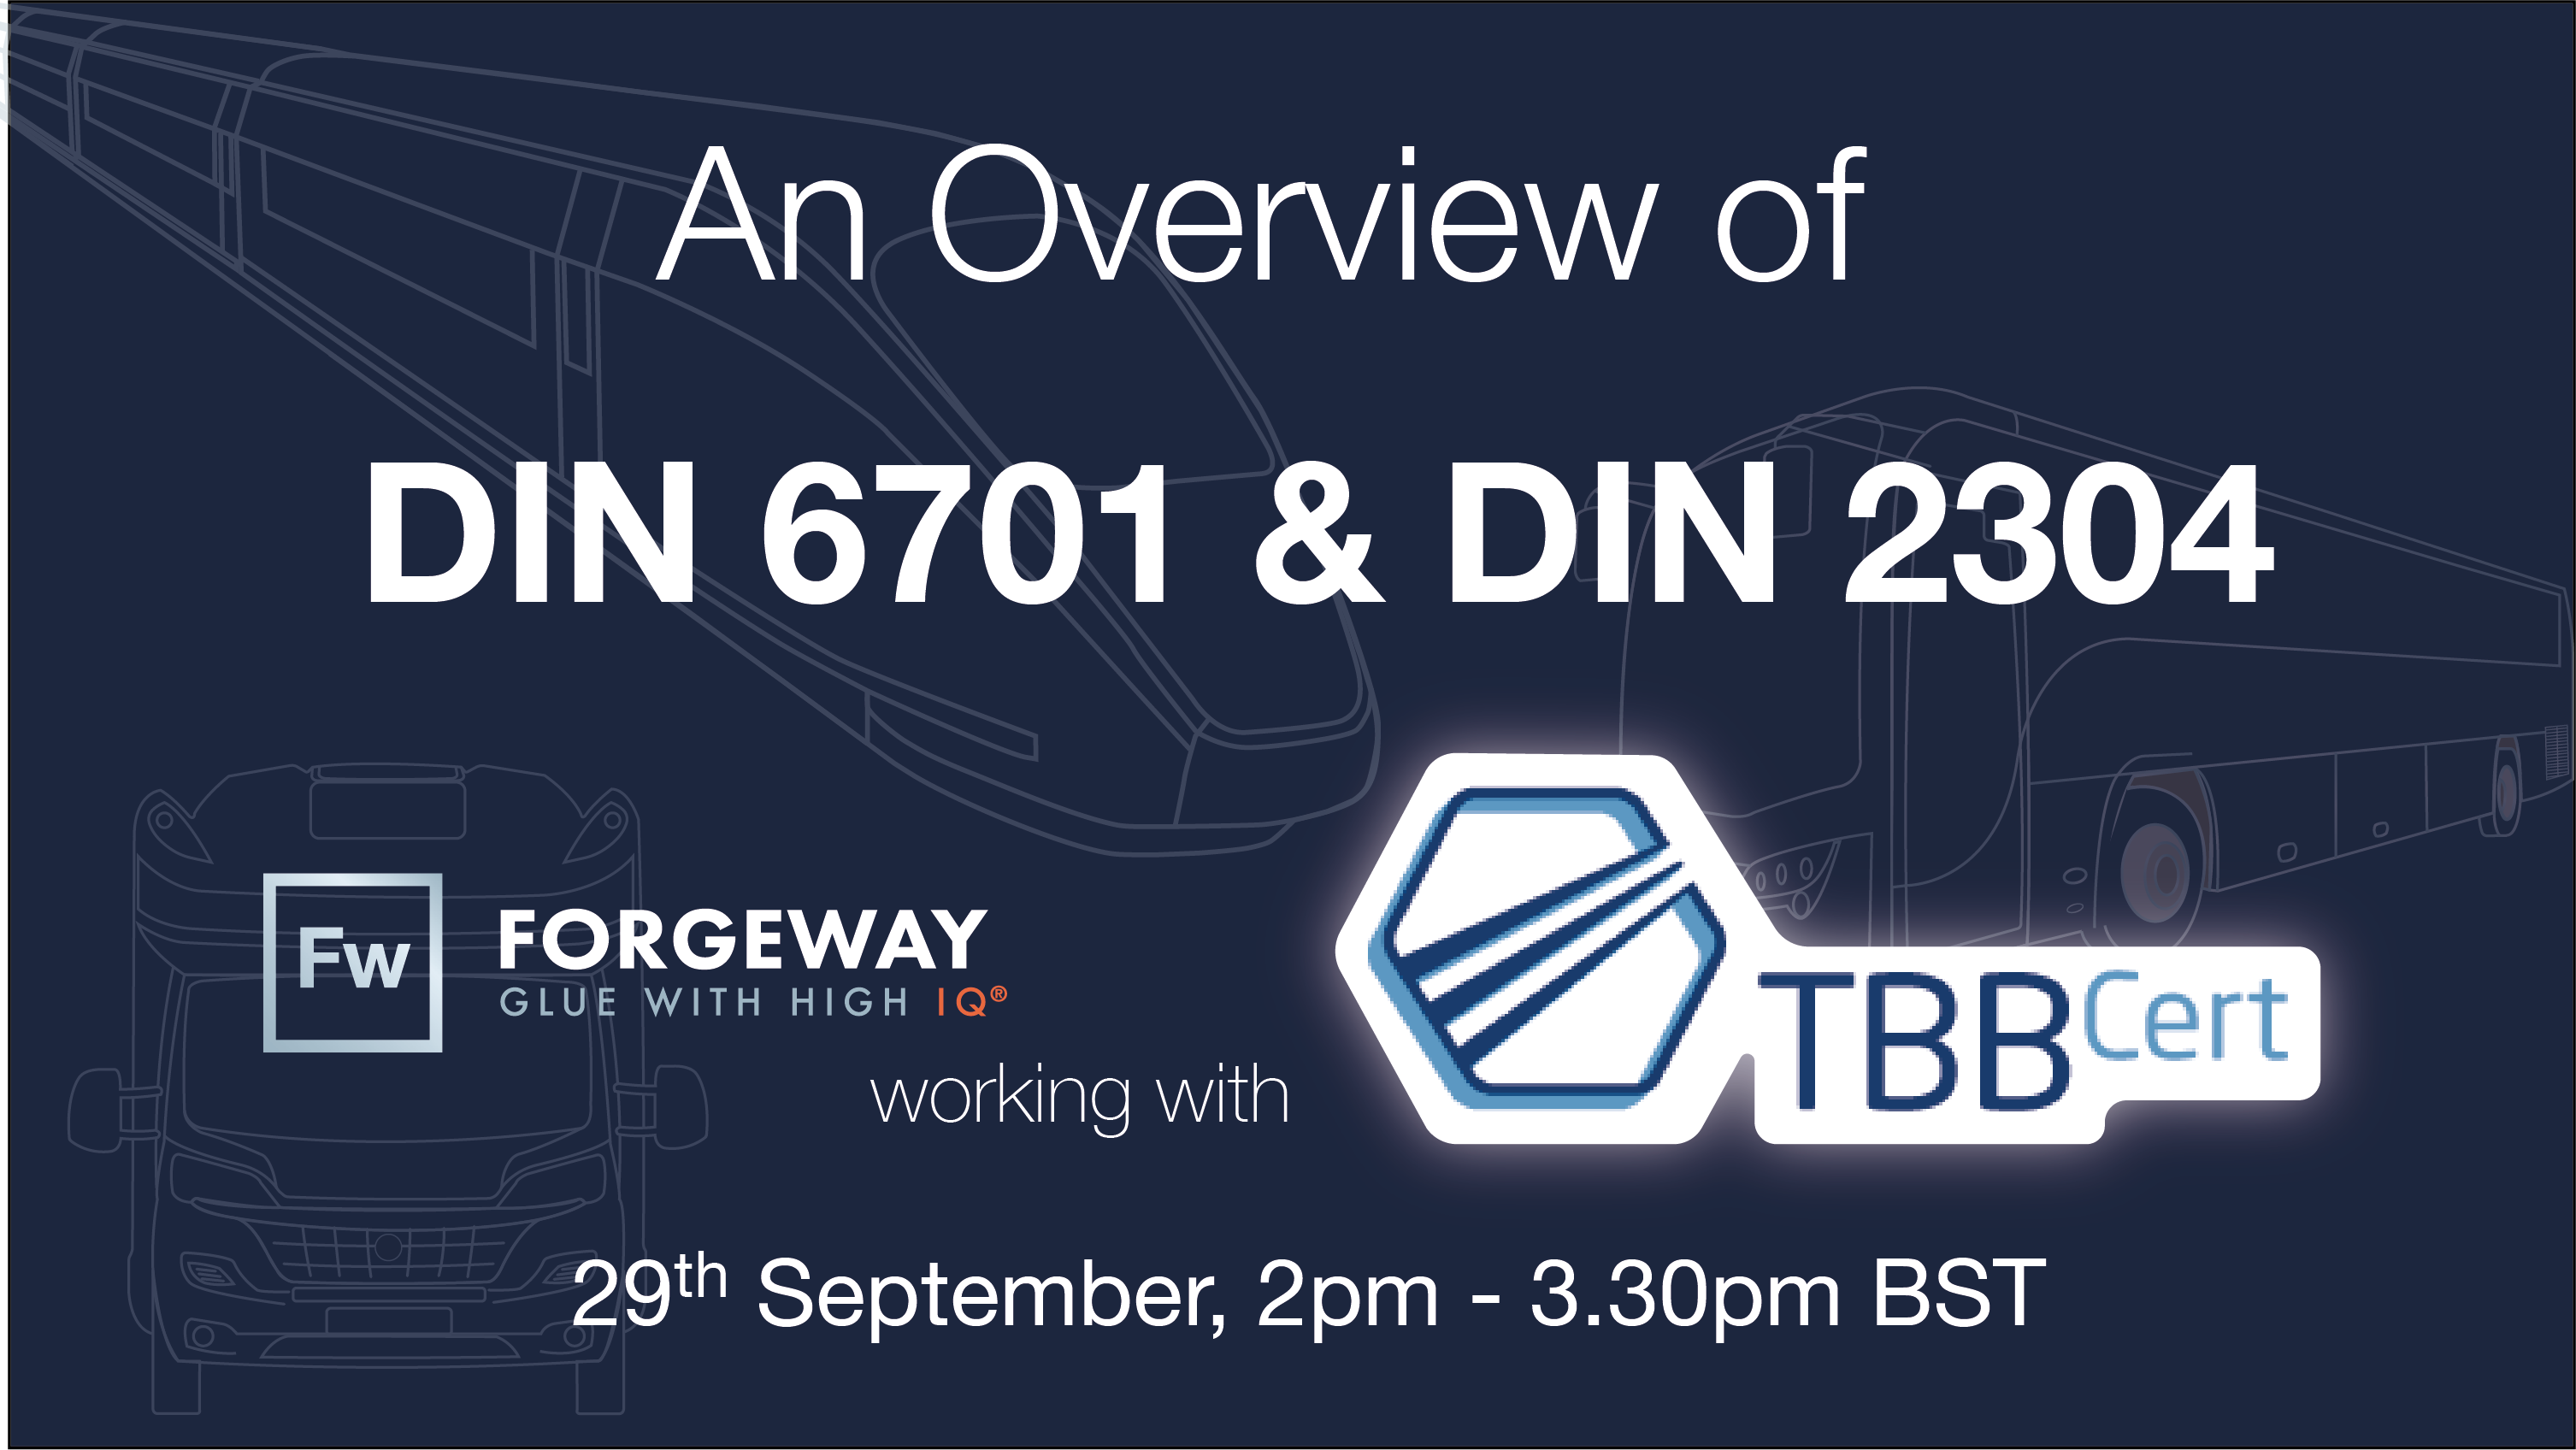 DIN 6701 and DIN 2304 explained